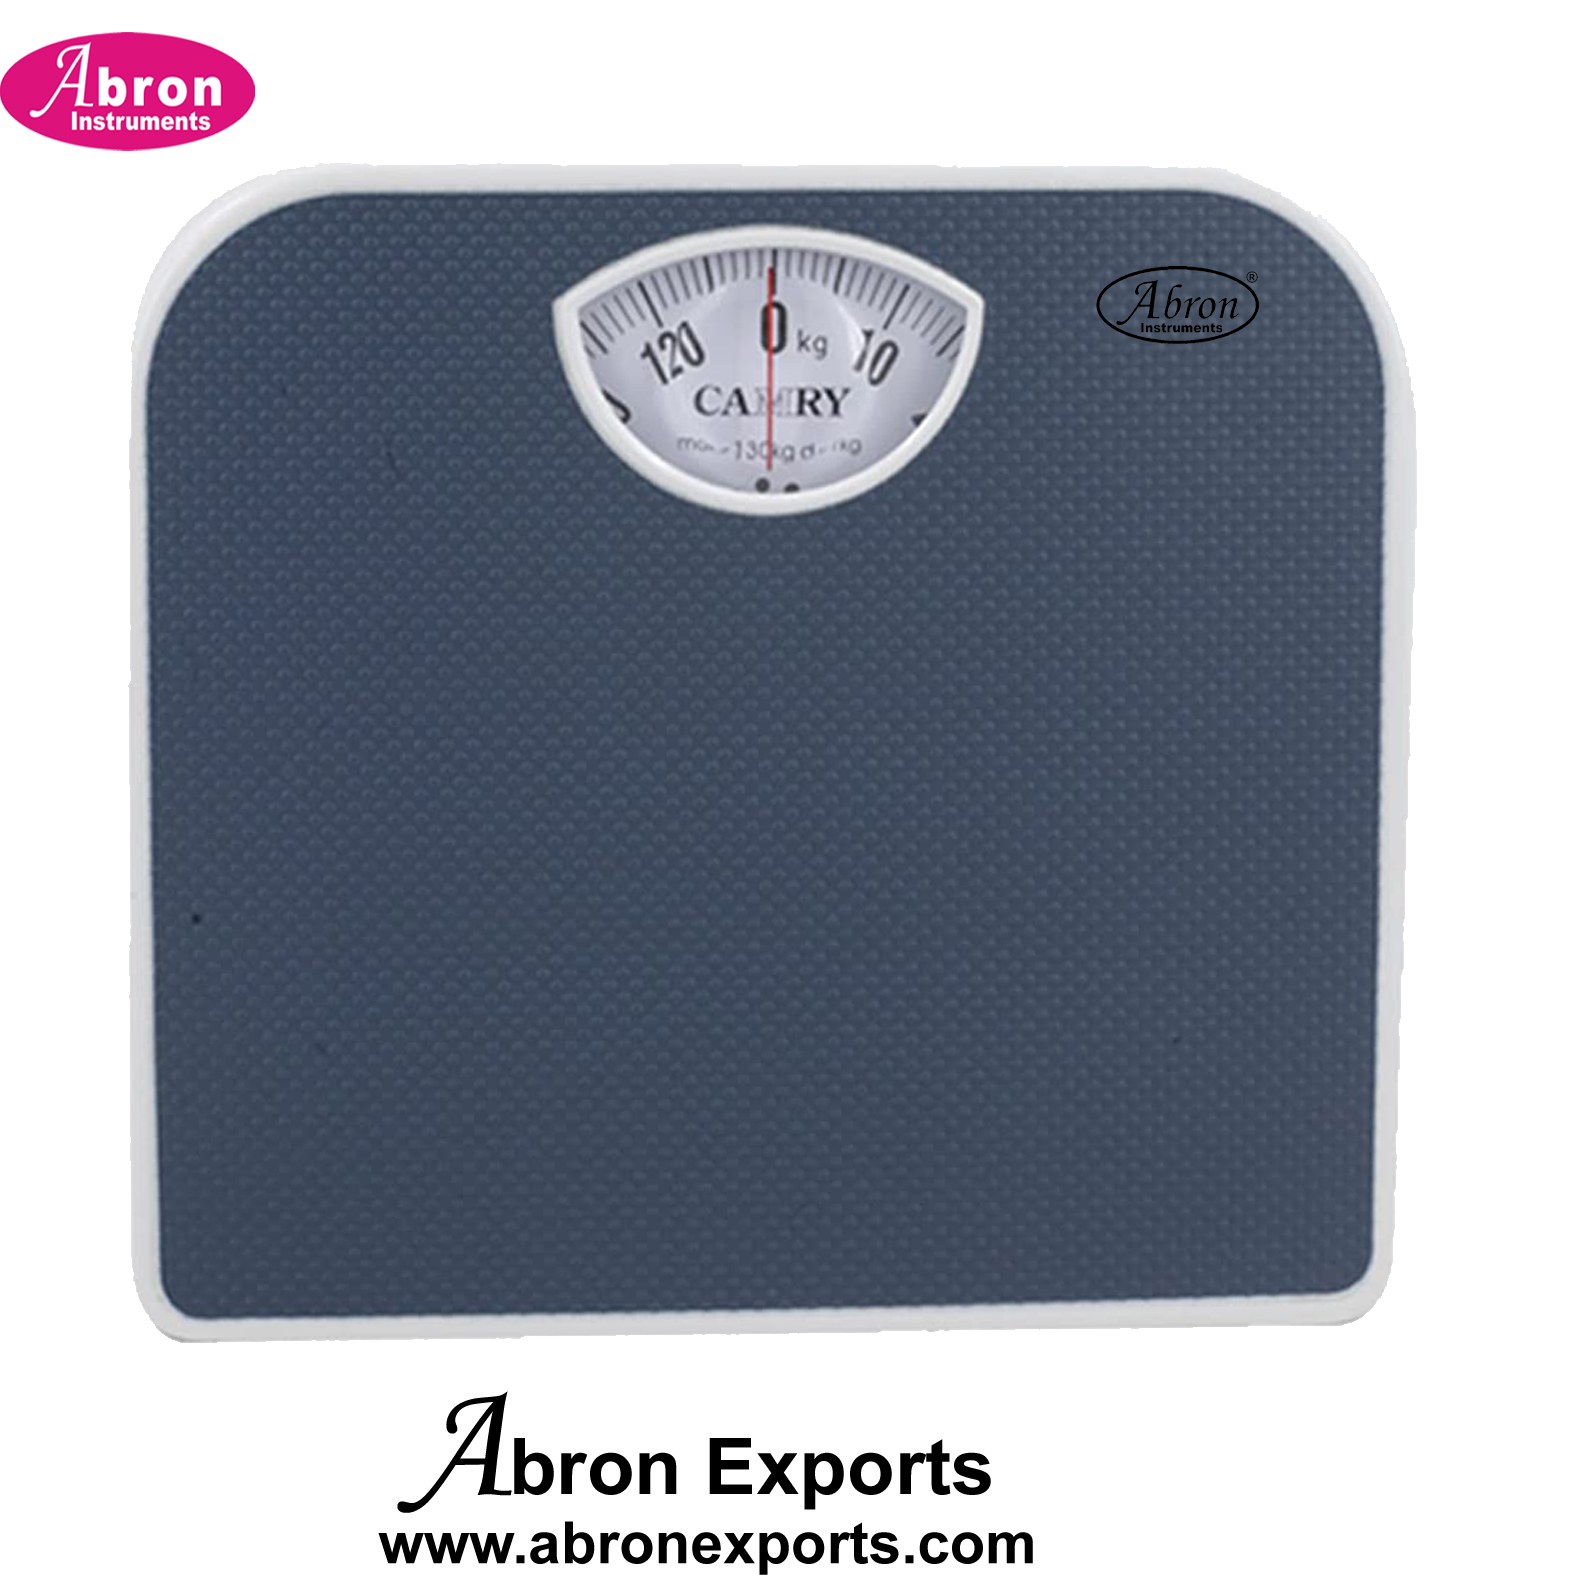 Balance Personal Weighing Scale Dial Type 130kg LC1KG Weighing Scale Platform Aero Adjustment Abon ABM-3255AM13 